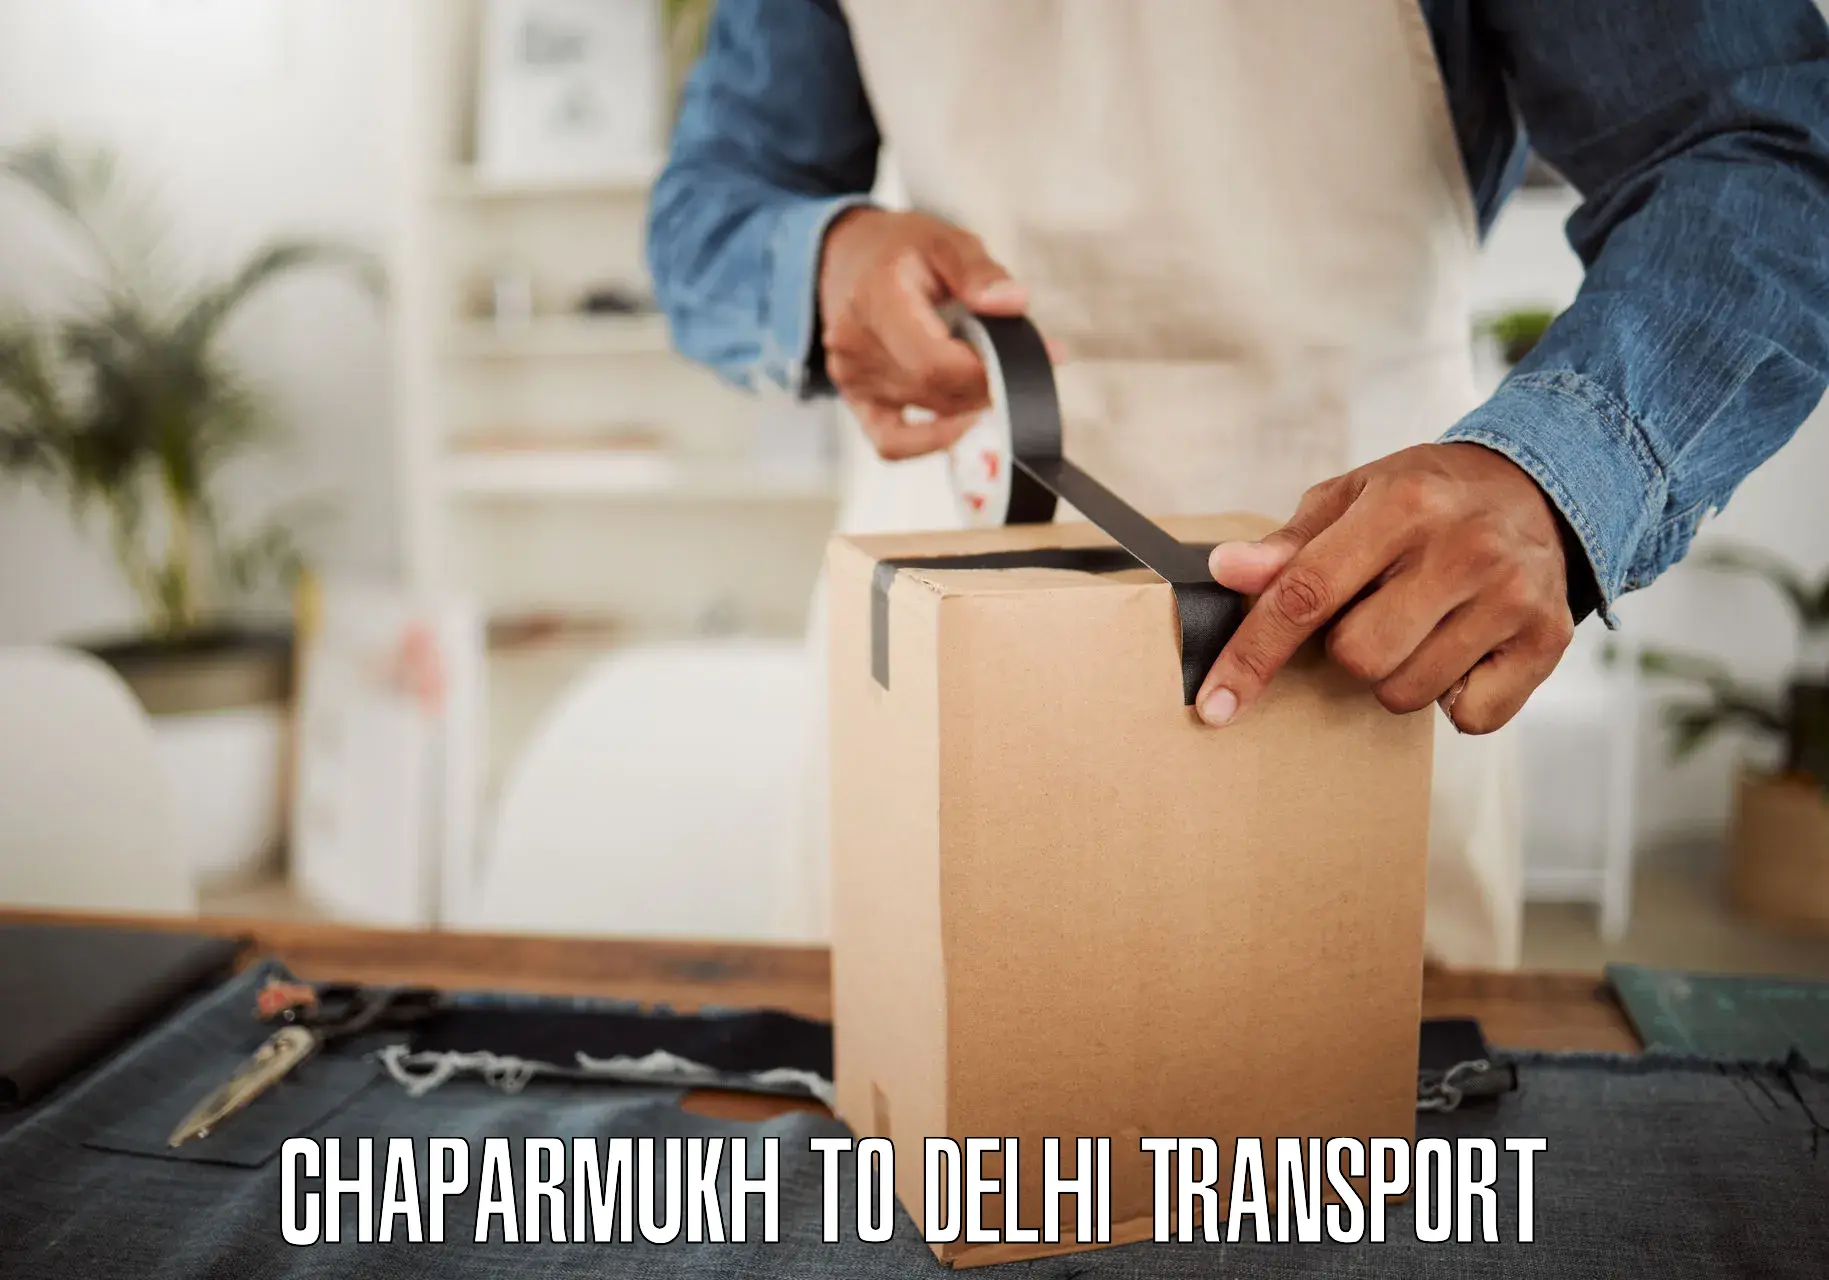 Shipping services Chaparmukh to NCR